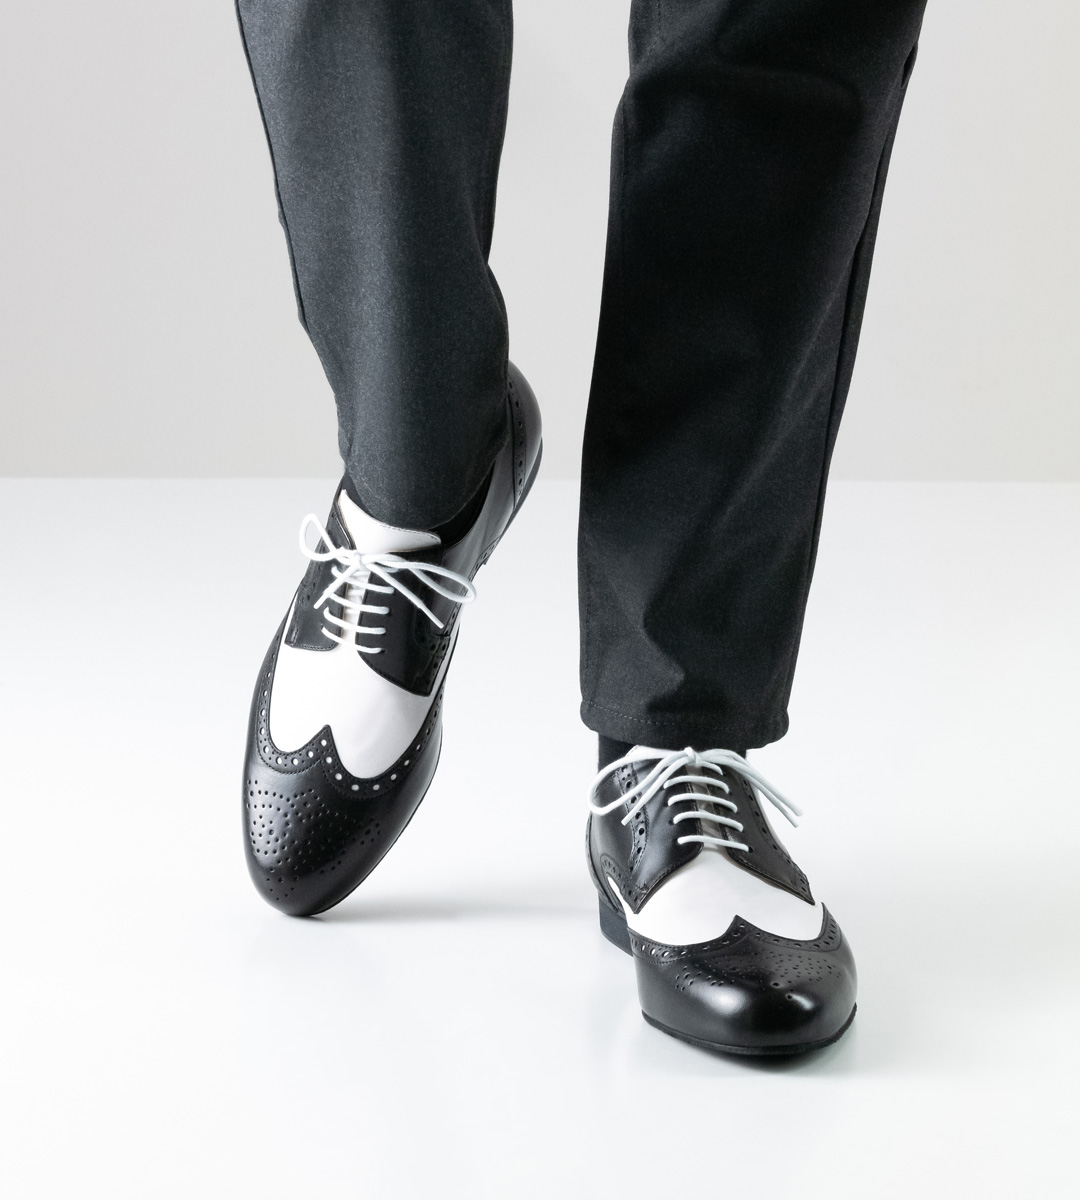 black and white men's dance shoe for tango by Werner Kern in combination with grey trousers